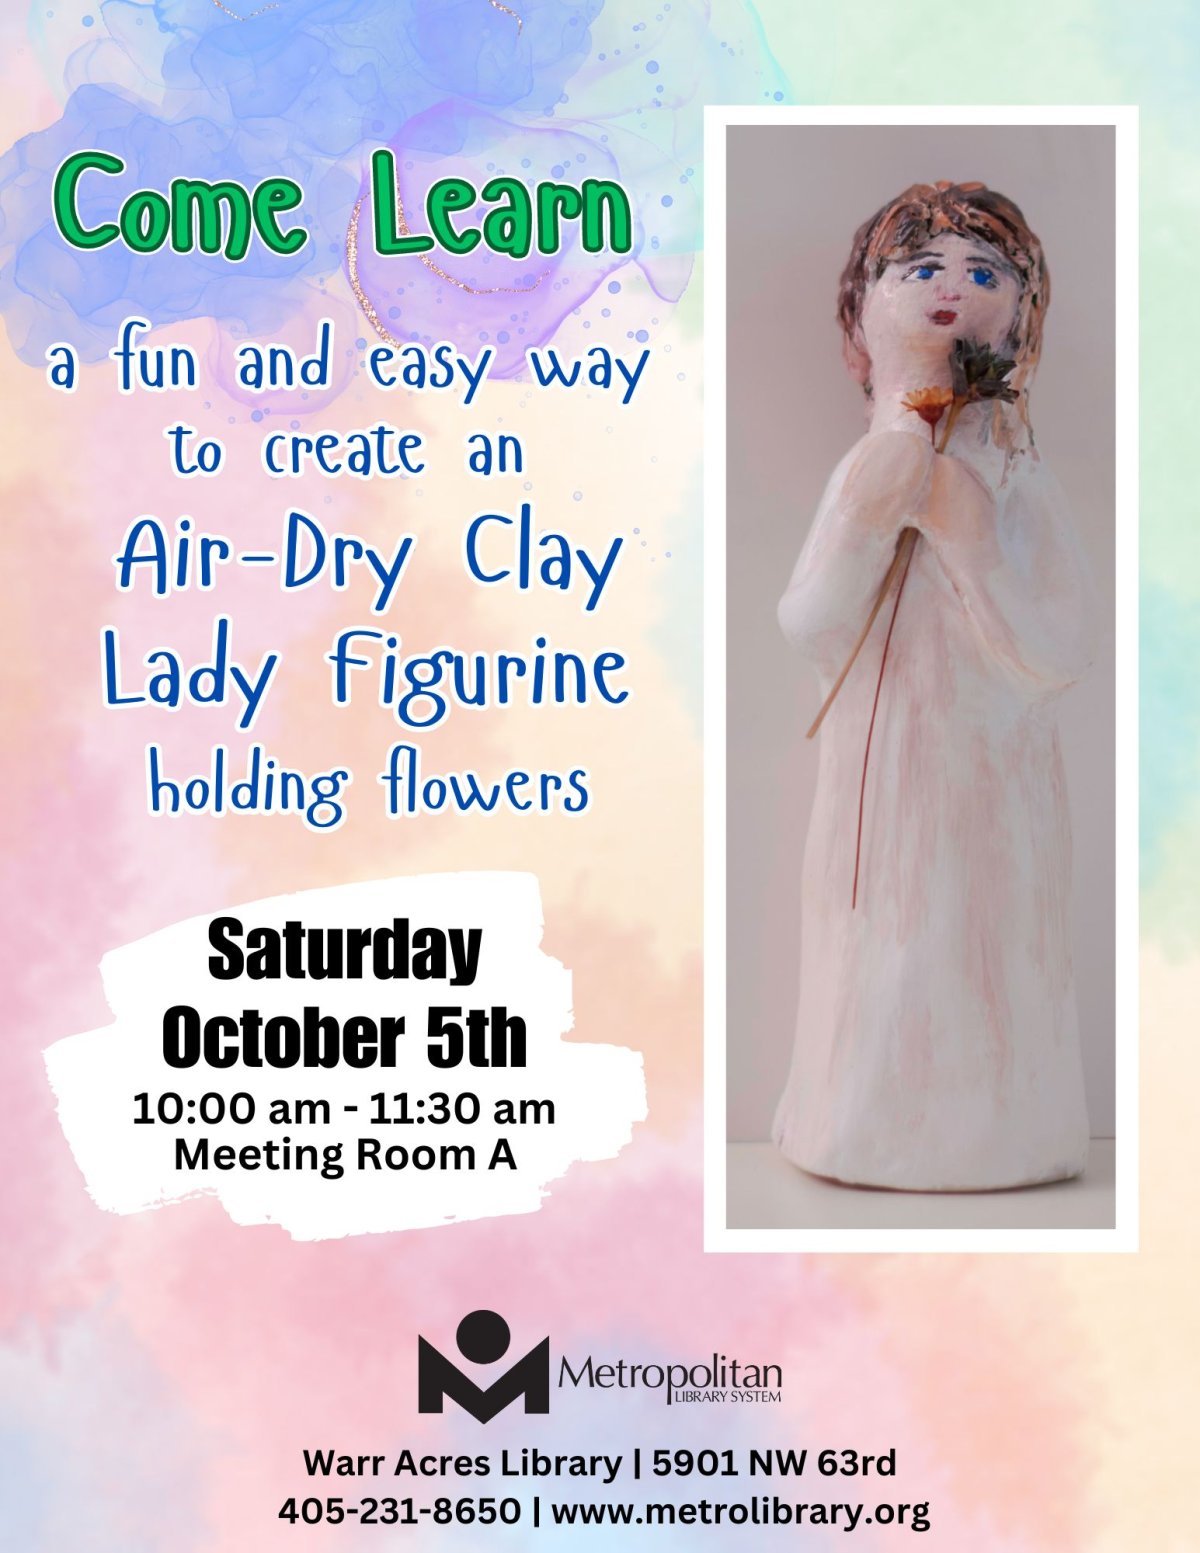 Come learn a fun and easy way to create an Air-Dry Clay Lady Figurine.